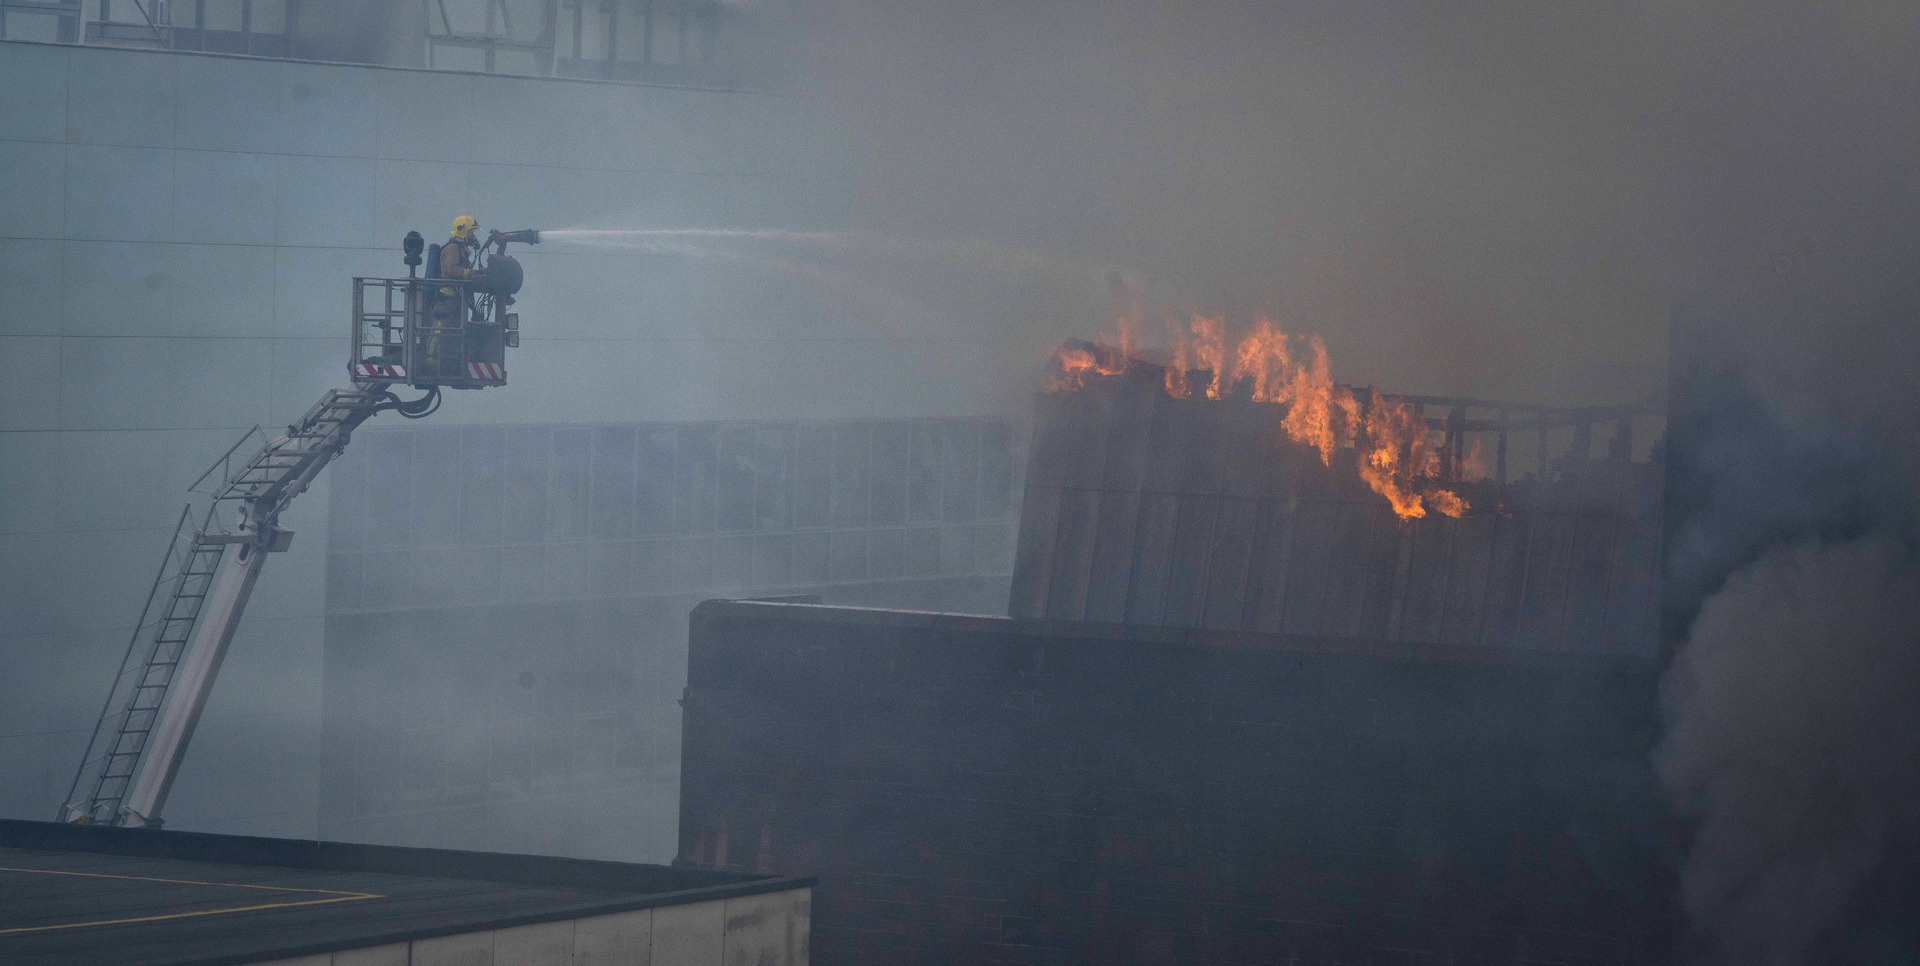 A firefighter works to put out a fire at the Glasgow School of Art Charles Rennie Mackintosh Building on May 23, 2014.